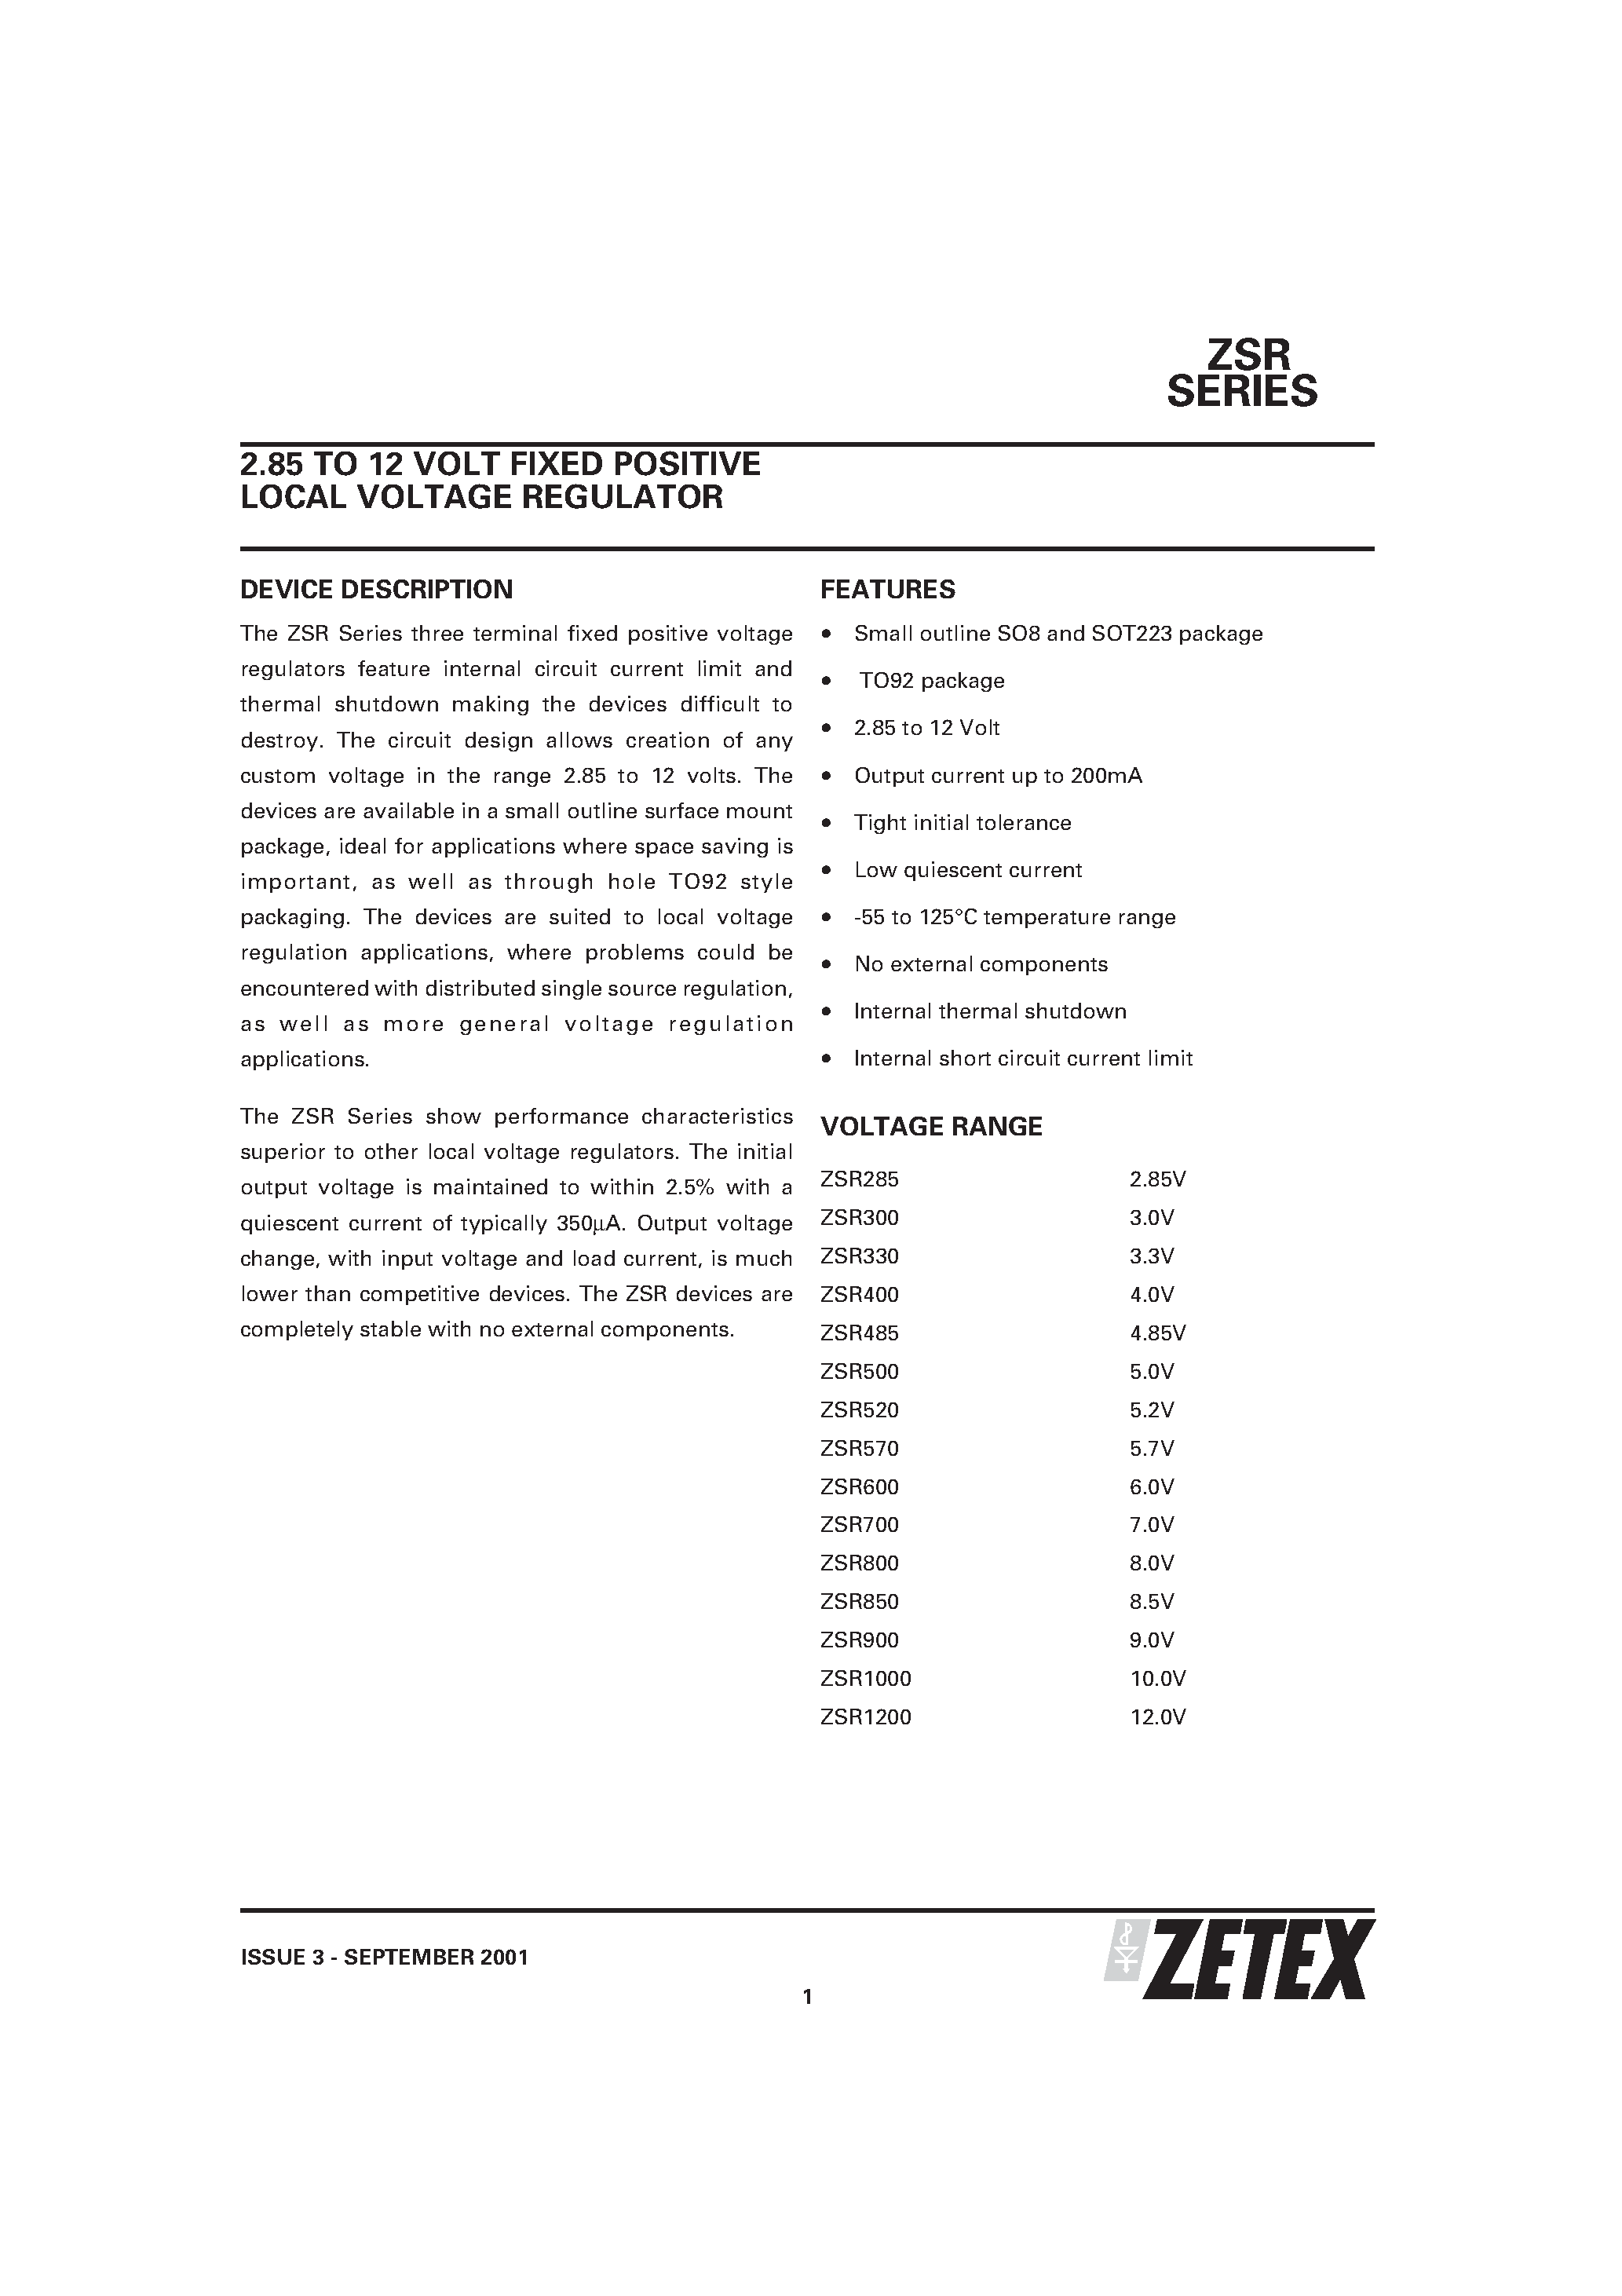 Datasheet ZSR285 - 2.85 TO 12 VOLT FIXED POSITIVE LOCAL VOLTAGE REGULATOR page 1